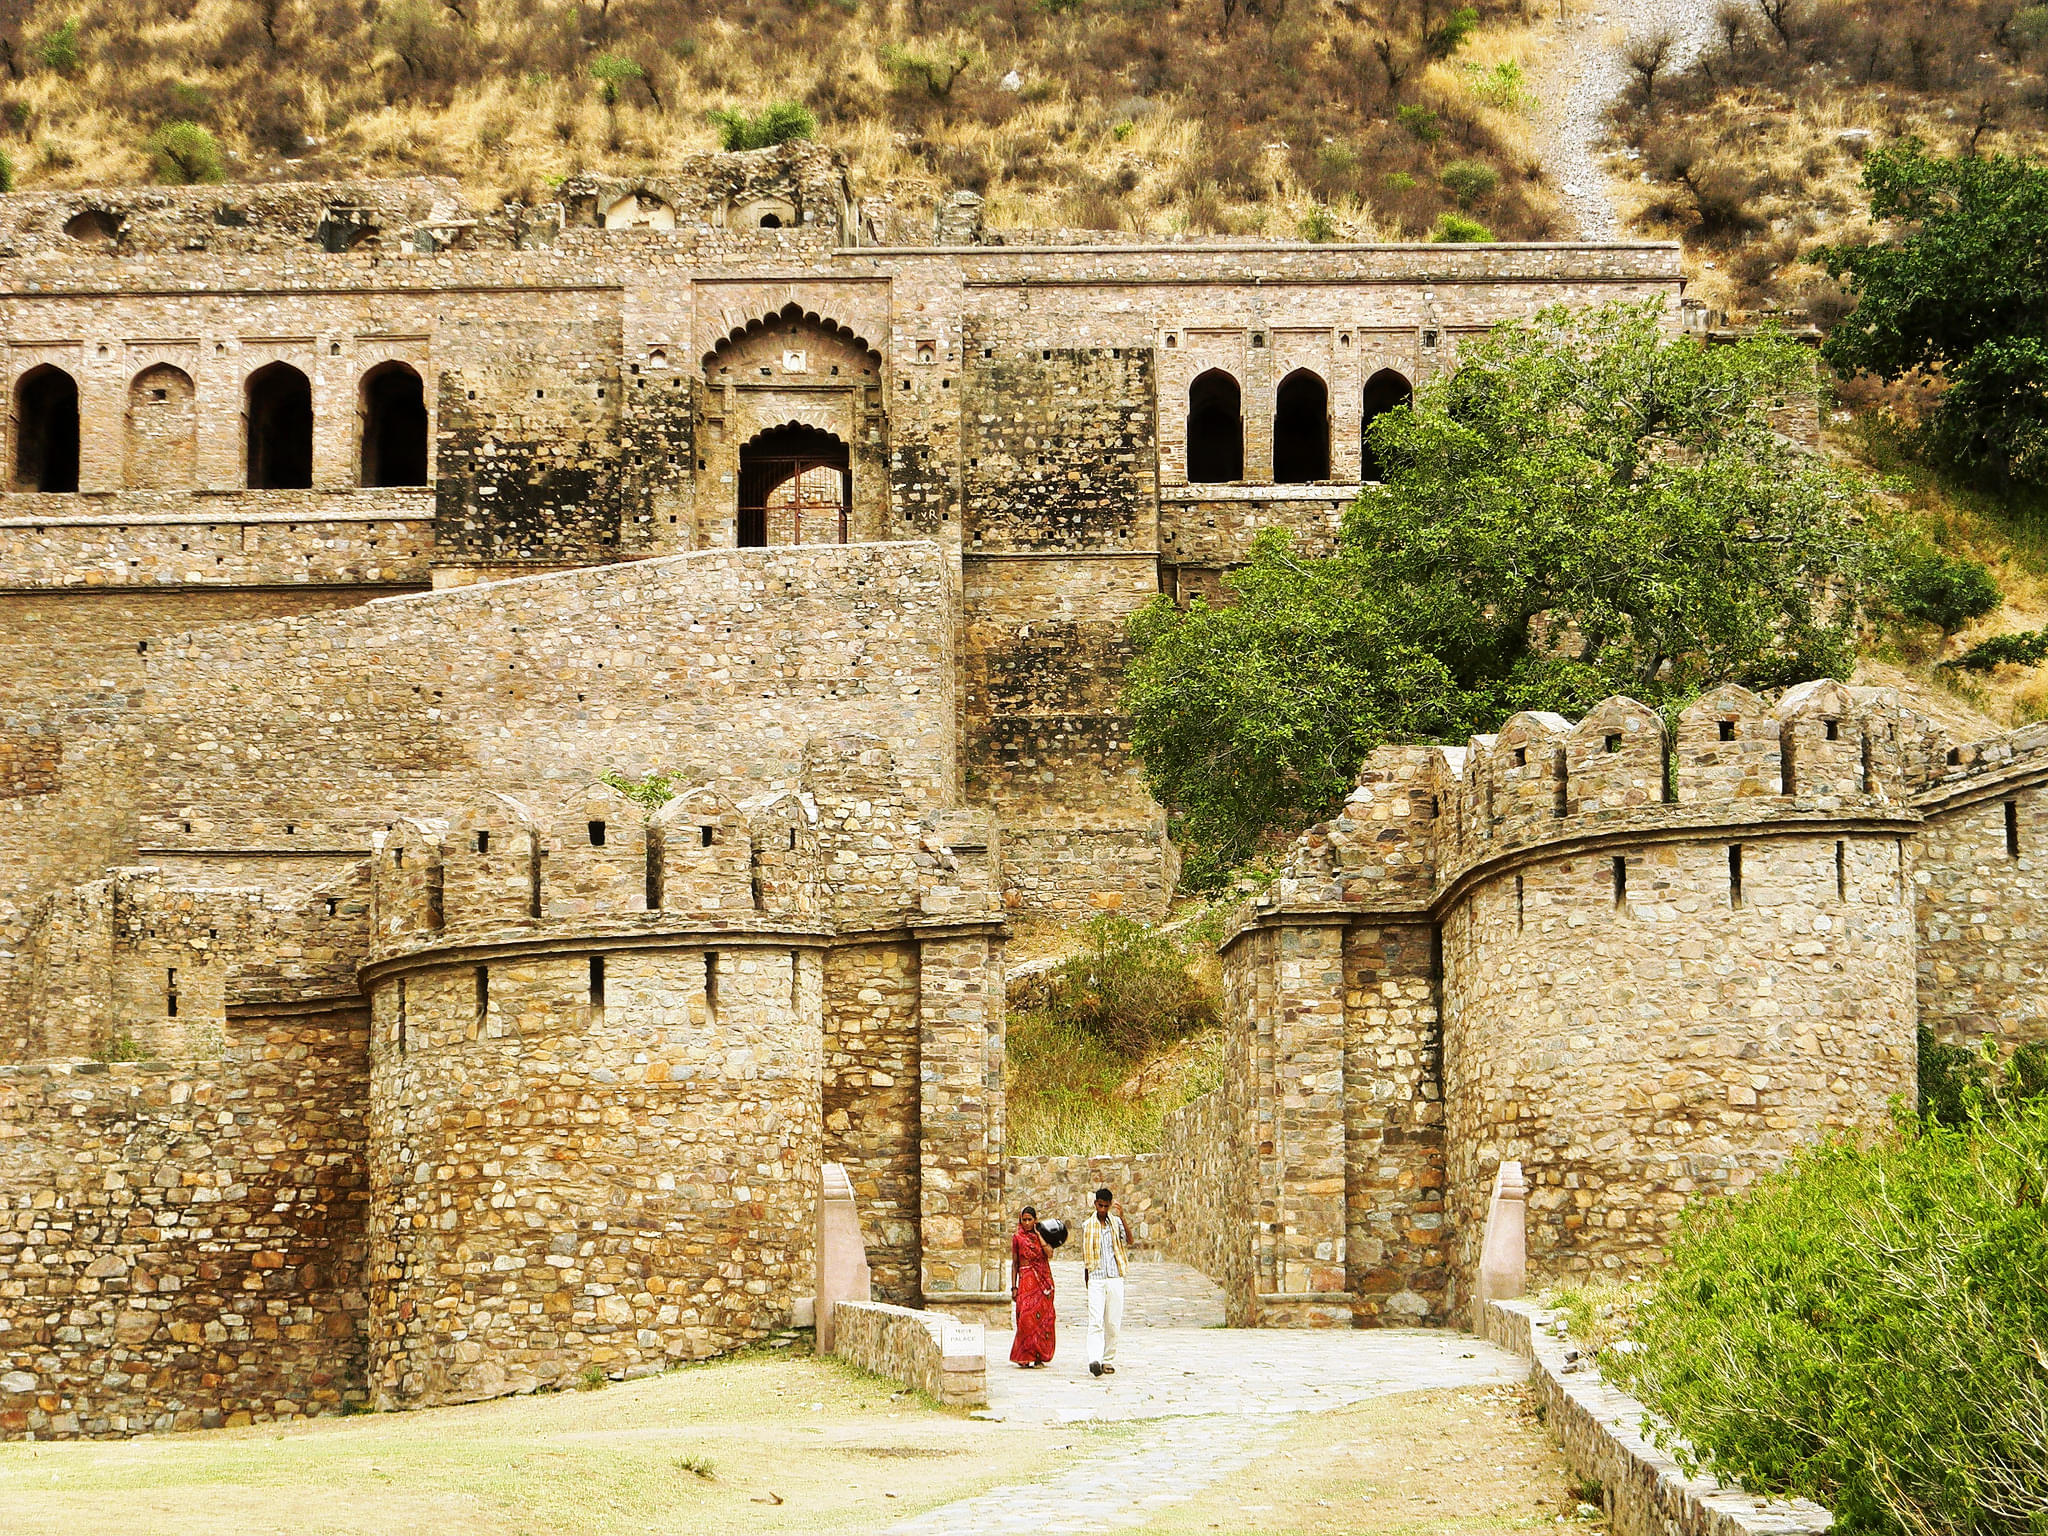 Bhangarh Fort Overview